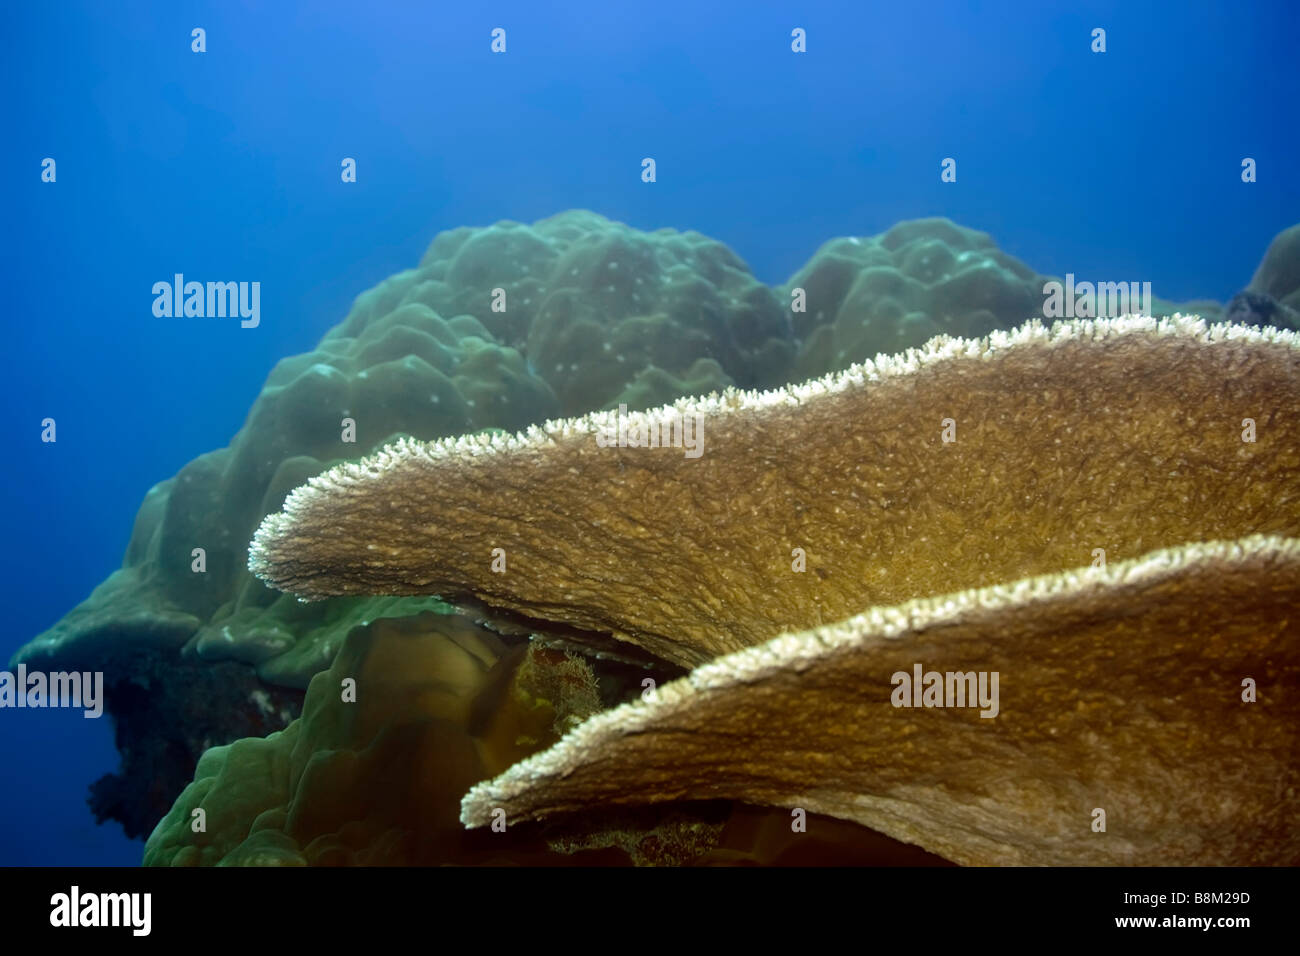 Table coral and Stony coral Maldives Indian ocean Addu atoll Stock Photo